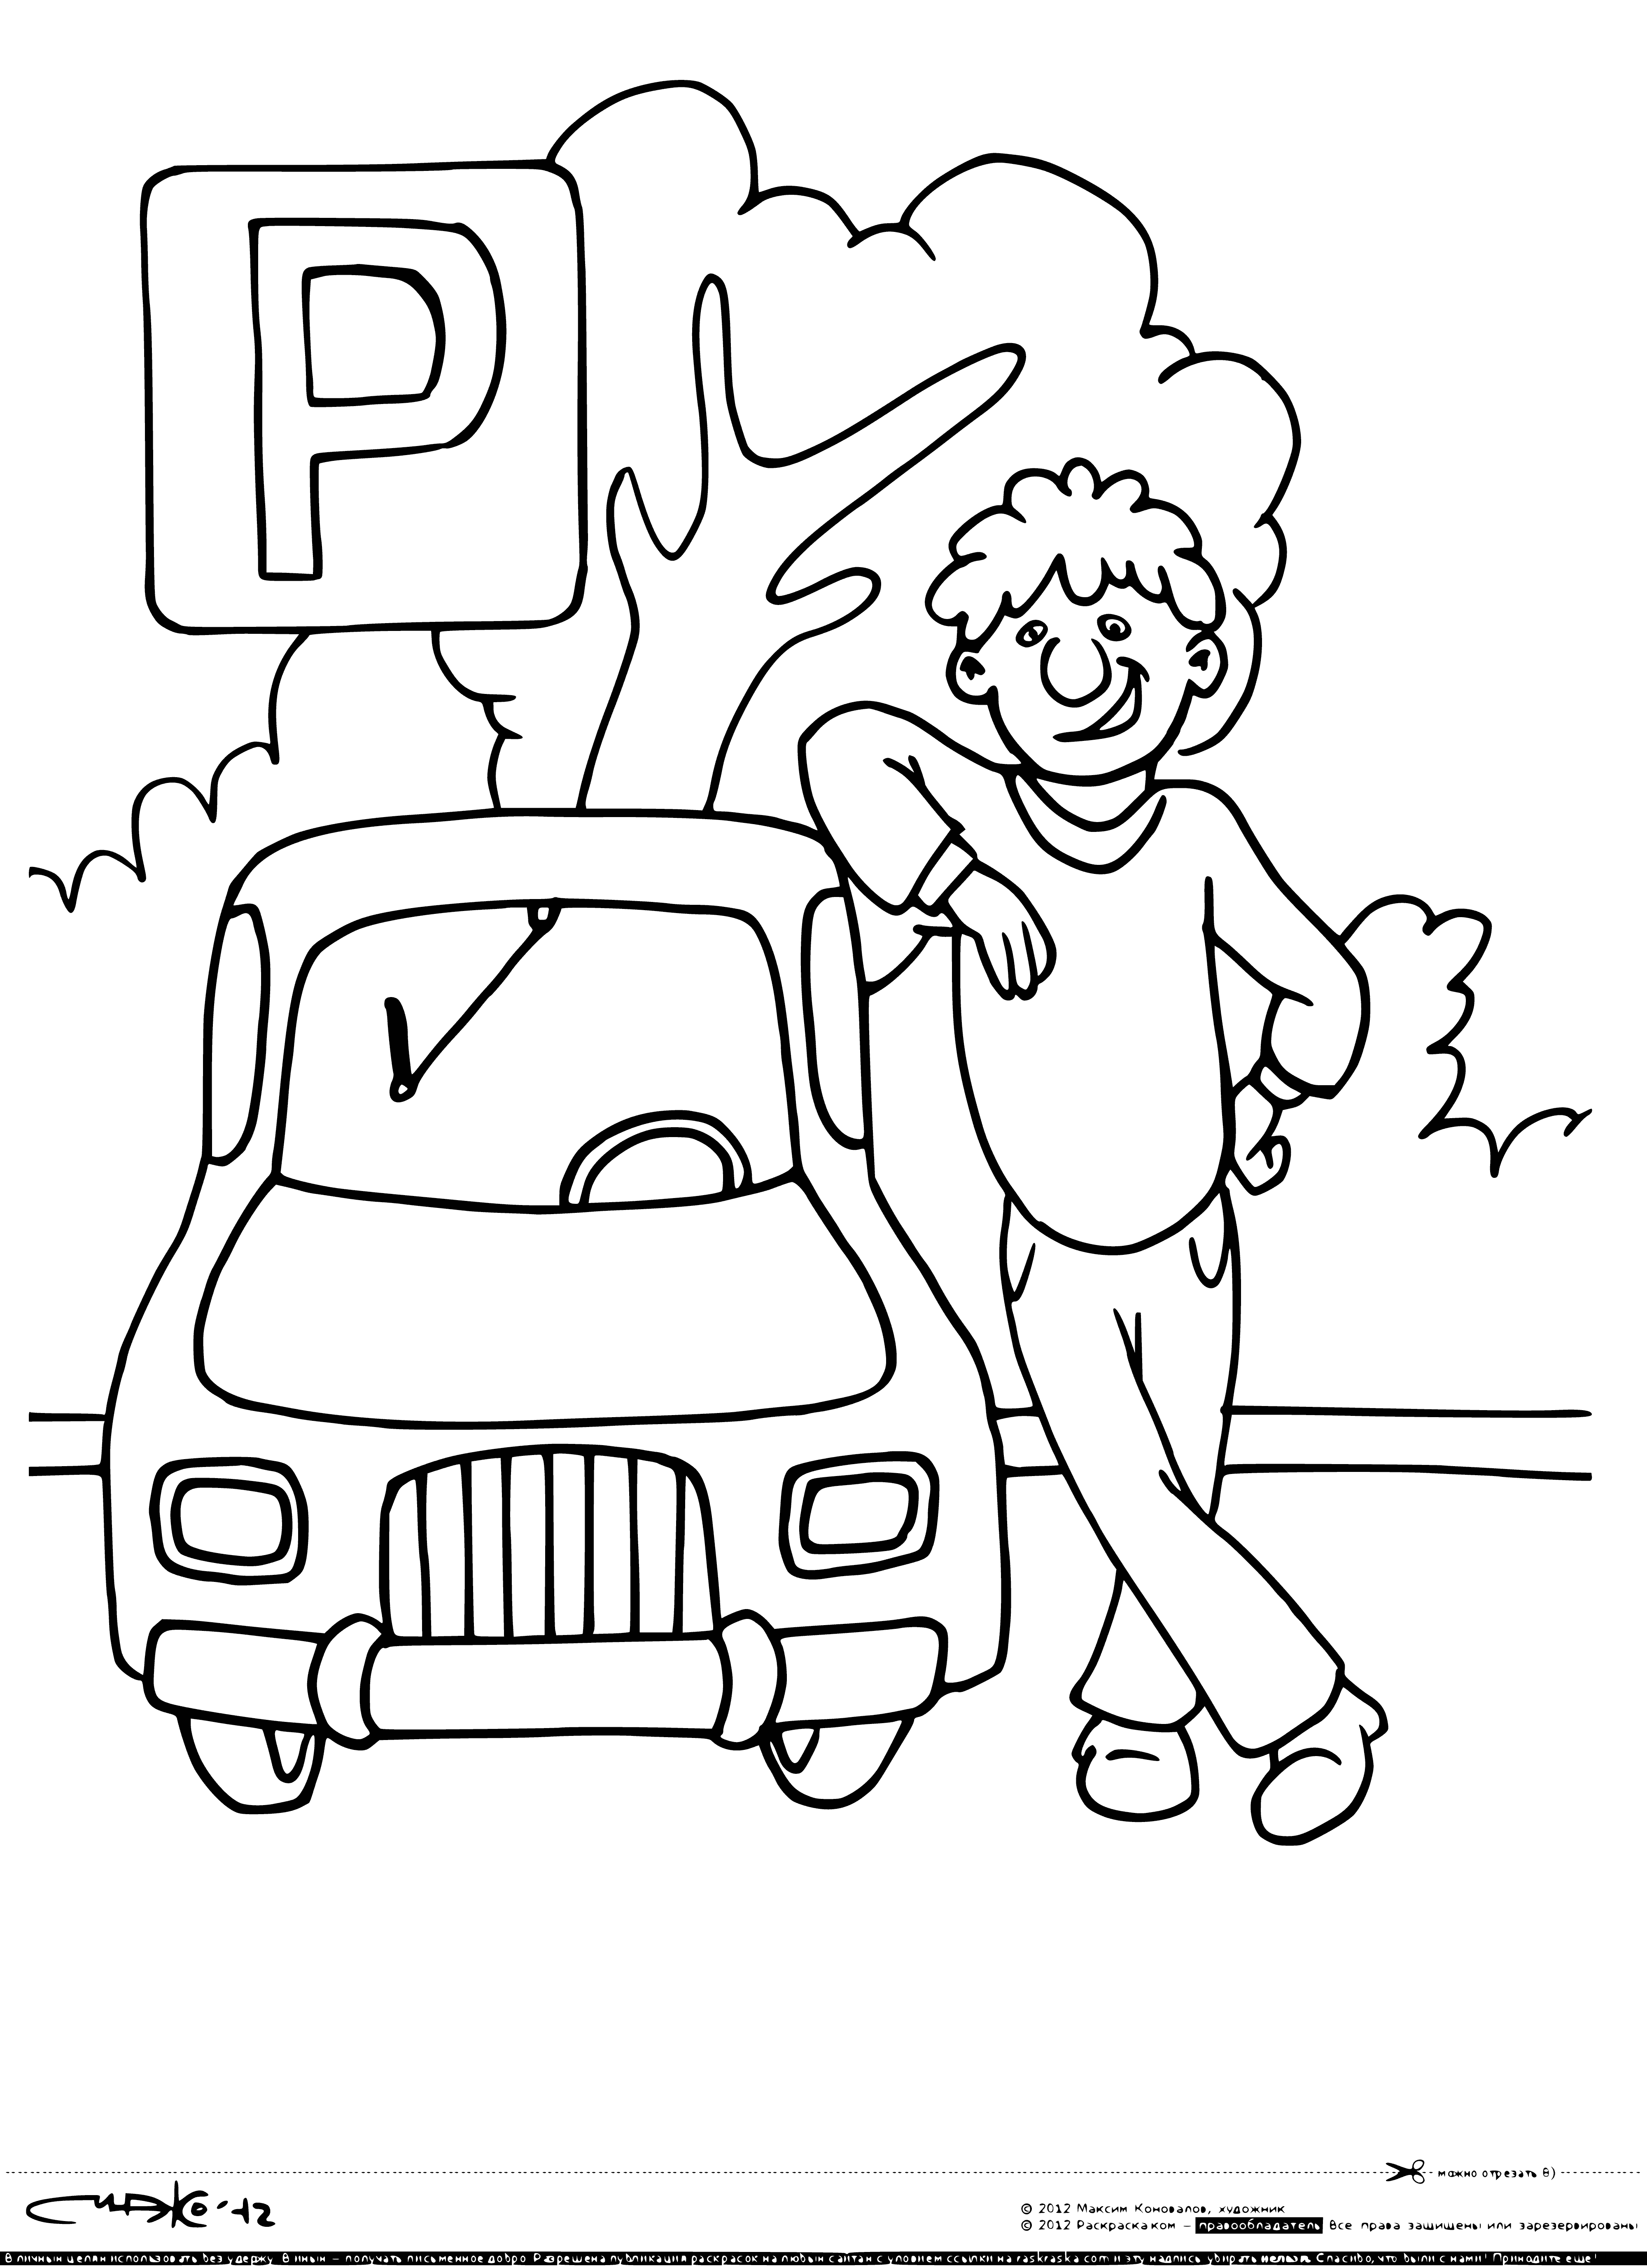 coloring page: Four signs on a coloring page warn drivers to stop, yield, and not park. #trafficlaws